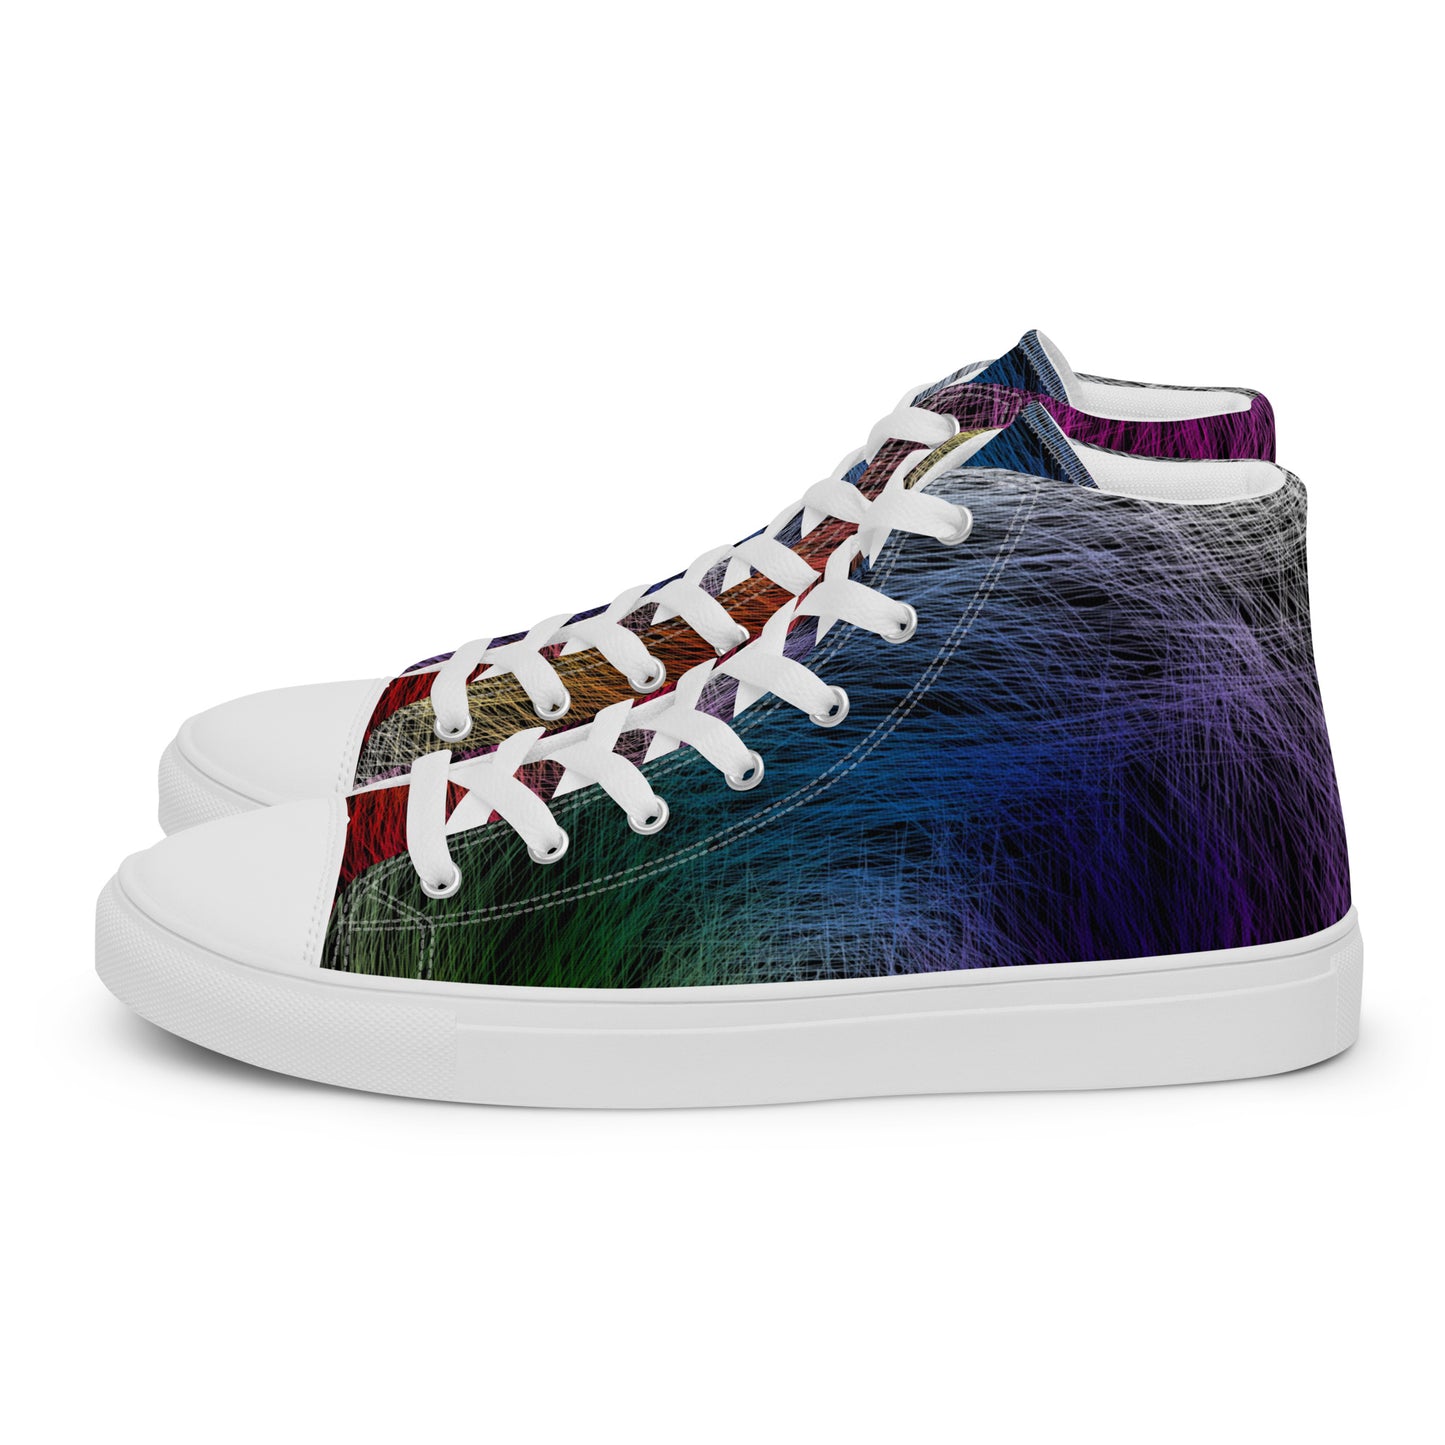 Wild Rainbow Men’s High Top Canvas Shoes | Casual LGBTQ+ Shoes | Stylish Festival Sneakers | Pride Shoes | Lace Up Sneakers | - Comfortable Culture - 5 - Shoes - Comfortable Culture